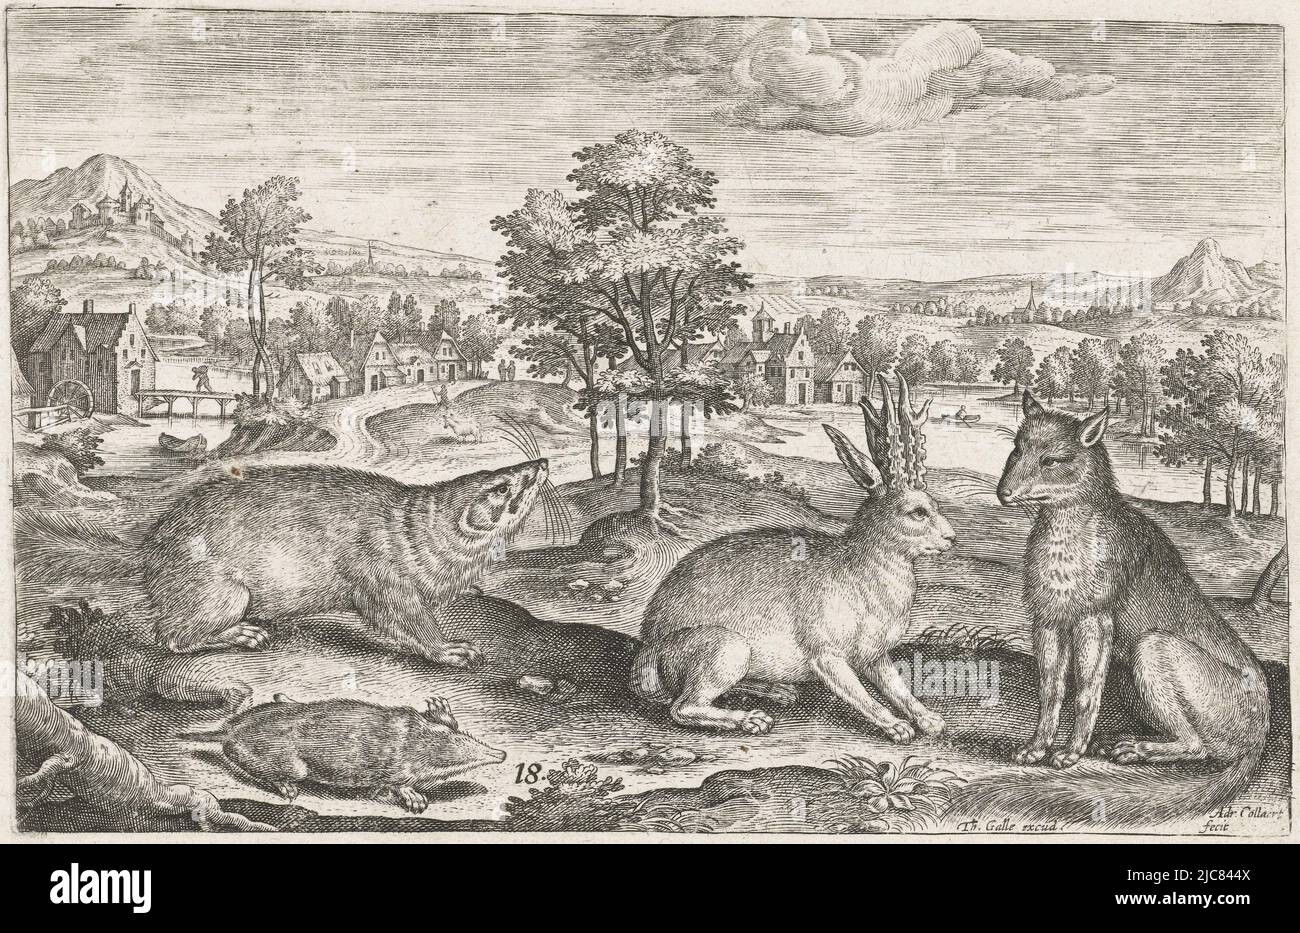 In the foreground a fox, a mole, a badger and a horned hare. In the background a landscape with a village. The print is part of a series with animals as subject, Forest animals Four legged animals Animalivm Qvaddrvpedvm , print maker: Adriaen Collaert, (mentioned on object), Adriaen Collaert, publisher: Theodoor Galle, (mentioned on object), Antwerp, 1595 - 1599, paper, engraving, h 121 mm × w 189 mm Stock Photo